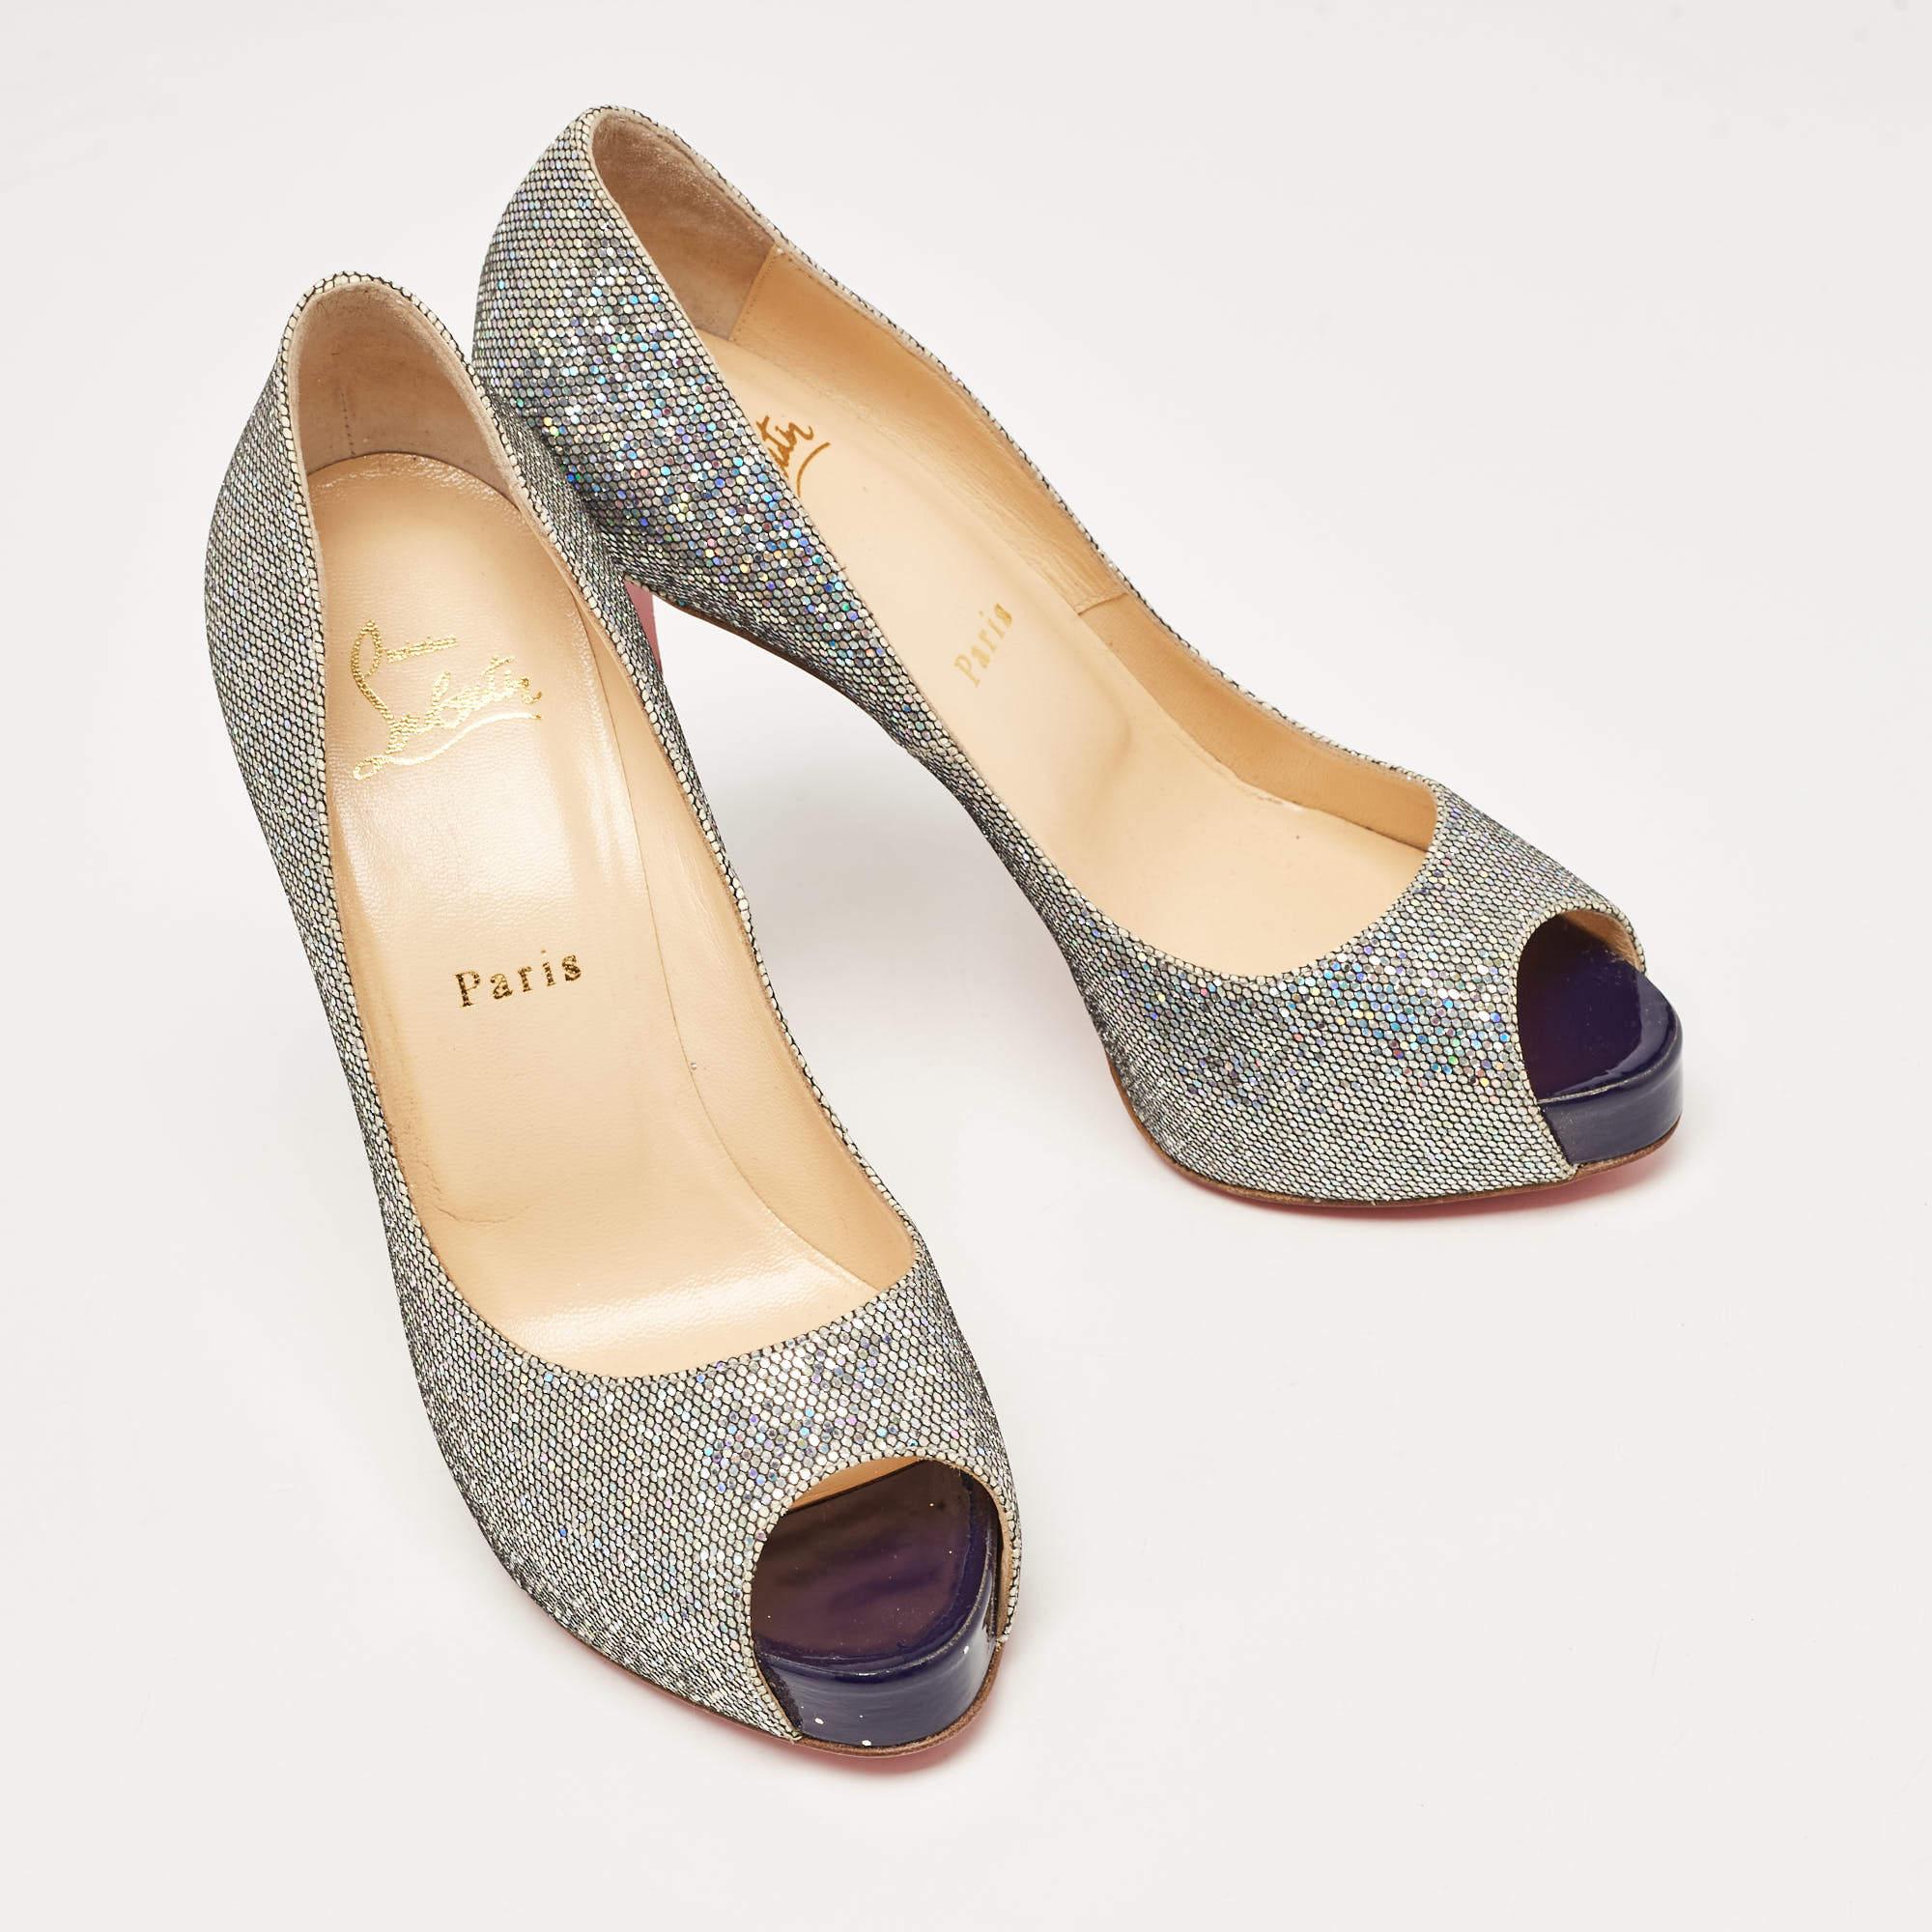 Christian Louboutin Metallic Glitter Fabric Disco Ball New Very Prive Pumps Size For Sale 2